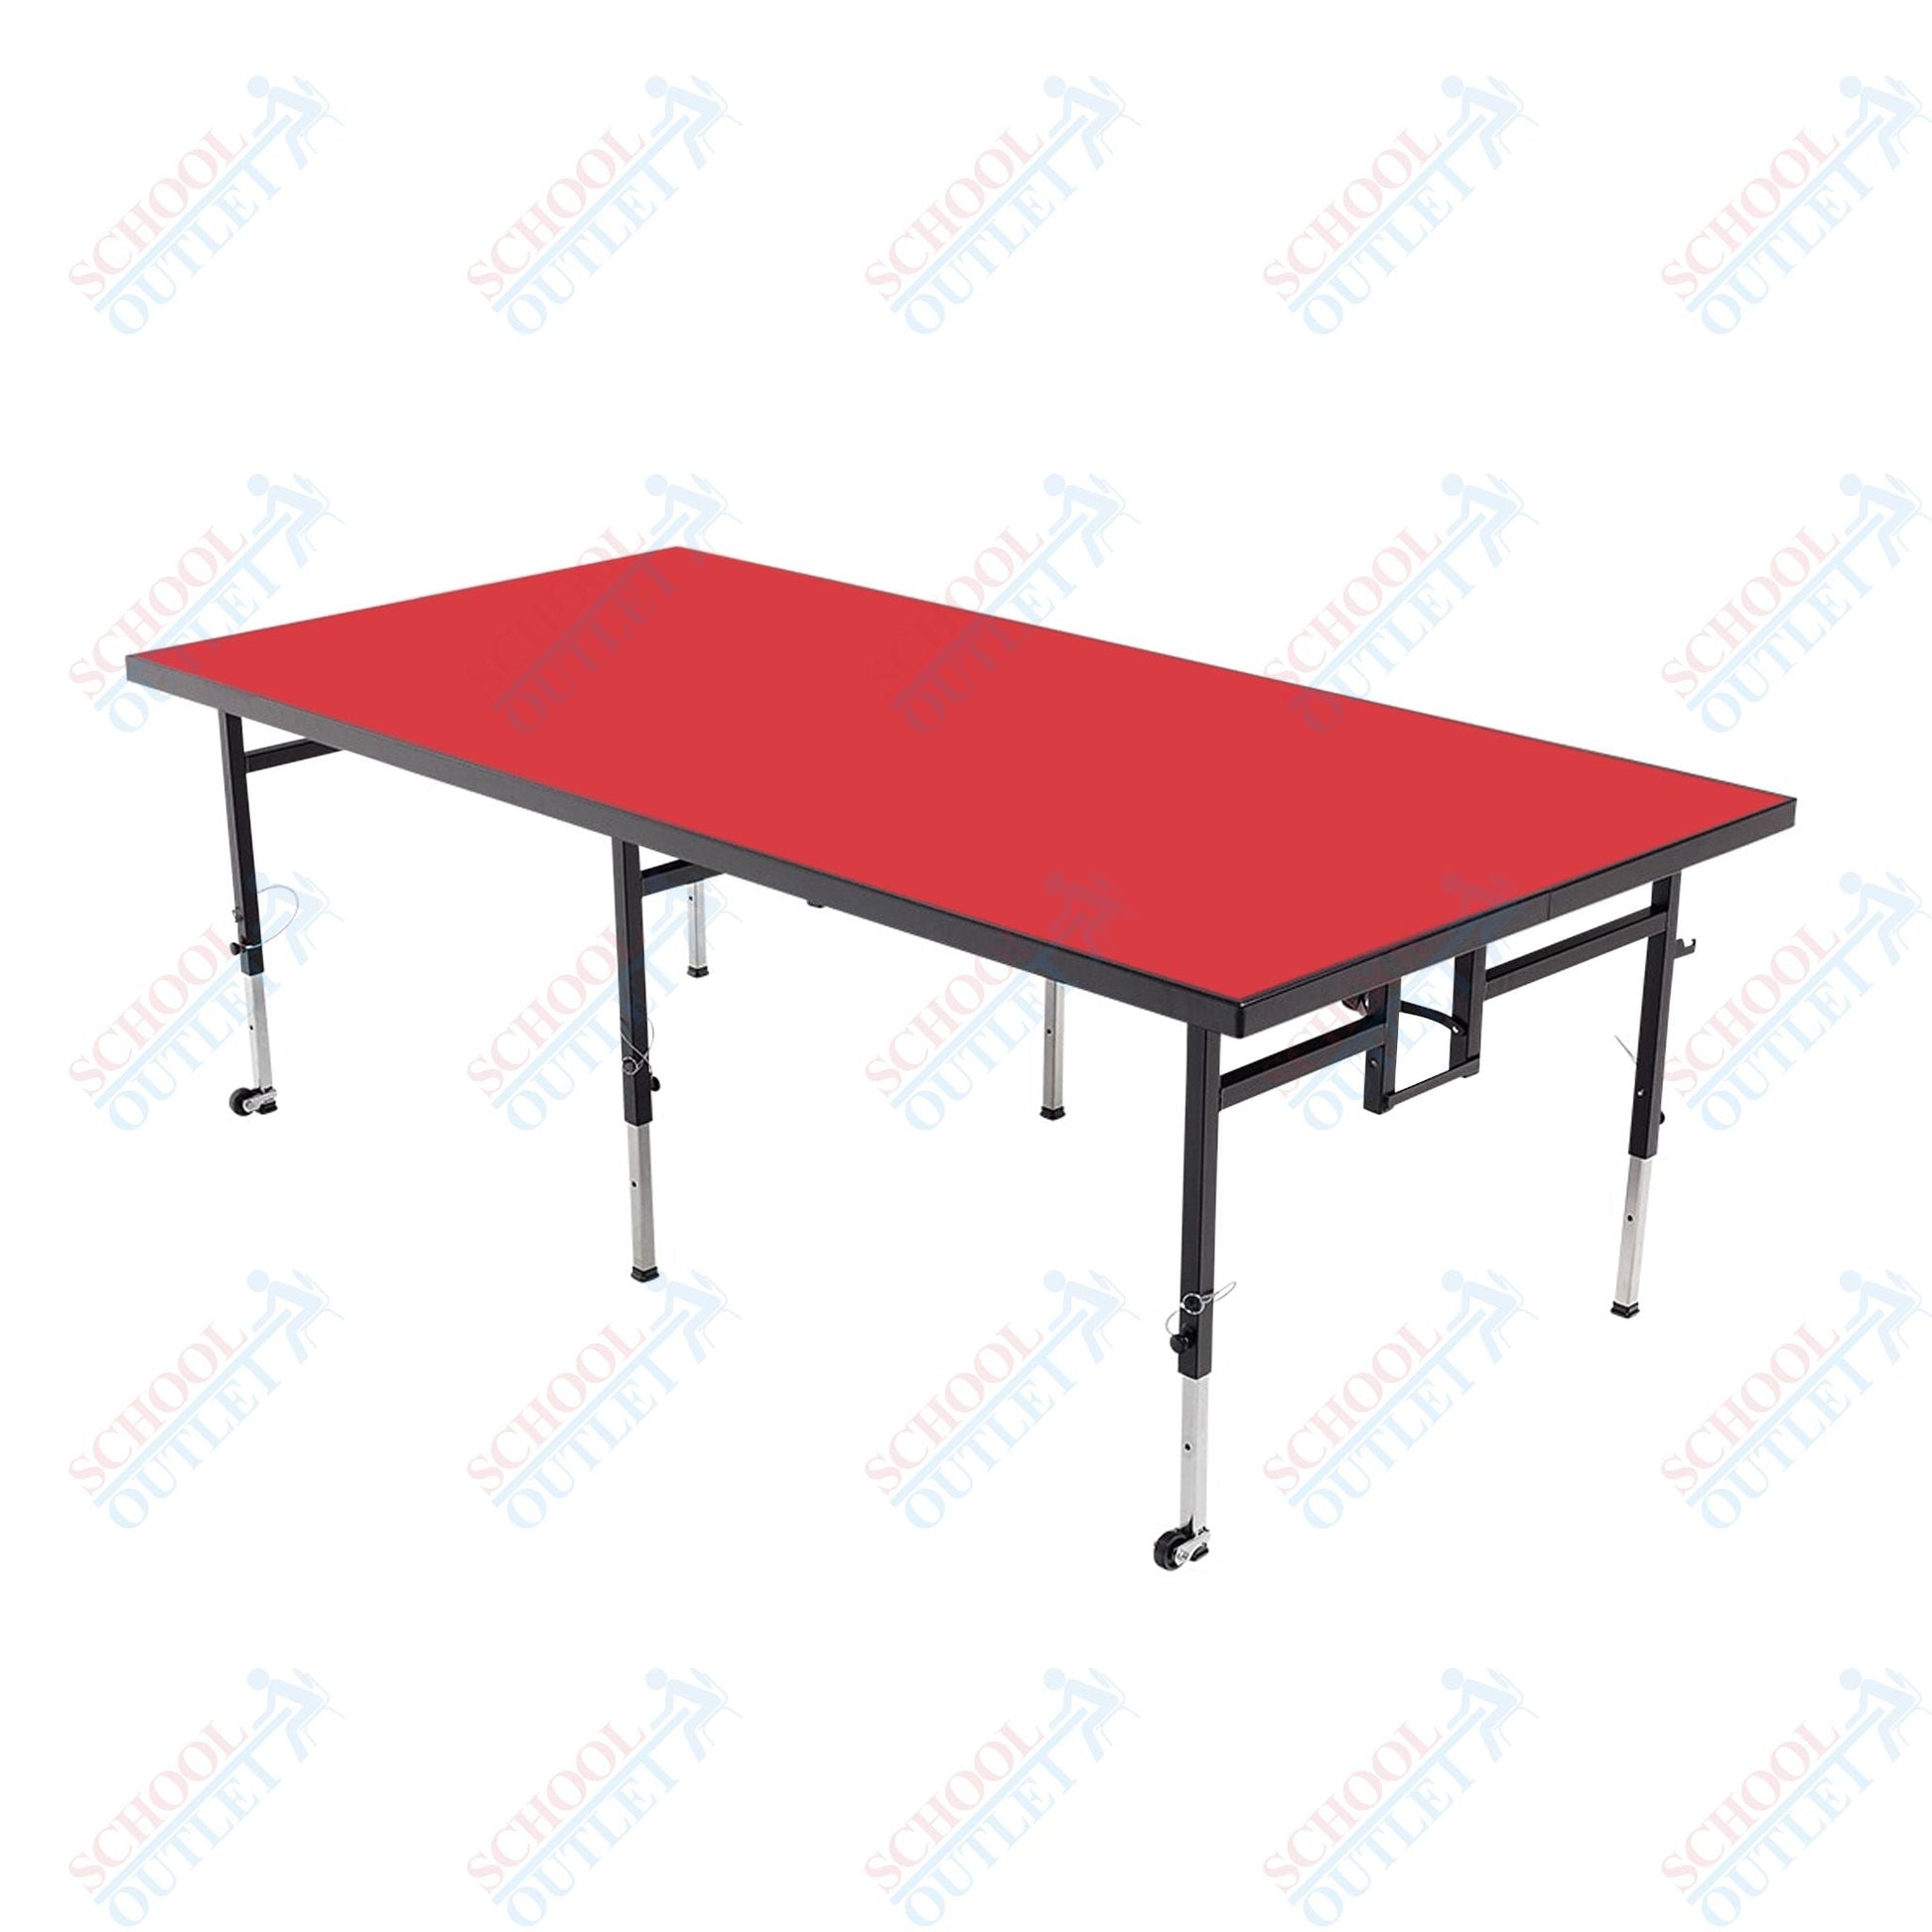 AmTab Adjustable Height Stage - Carpet Top - 48"W x 96"L x Adjustable 16" to 24"H (AmTab AMT-STA4816C) - SchoolOutlet